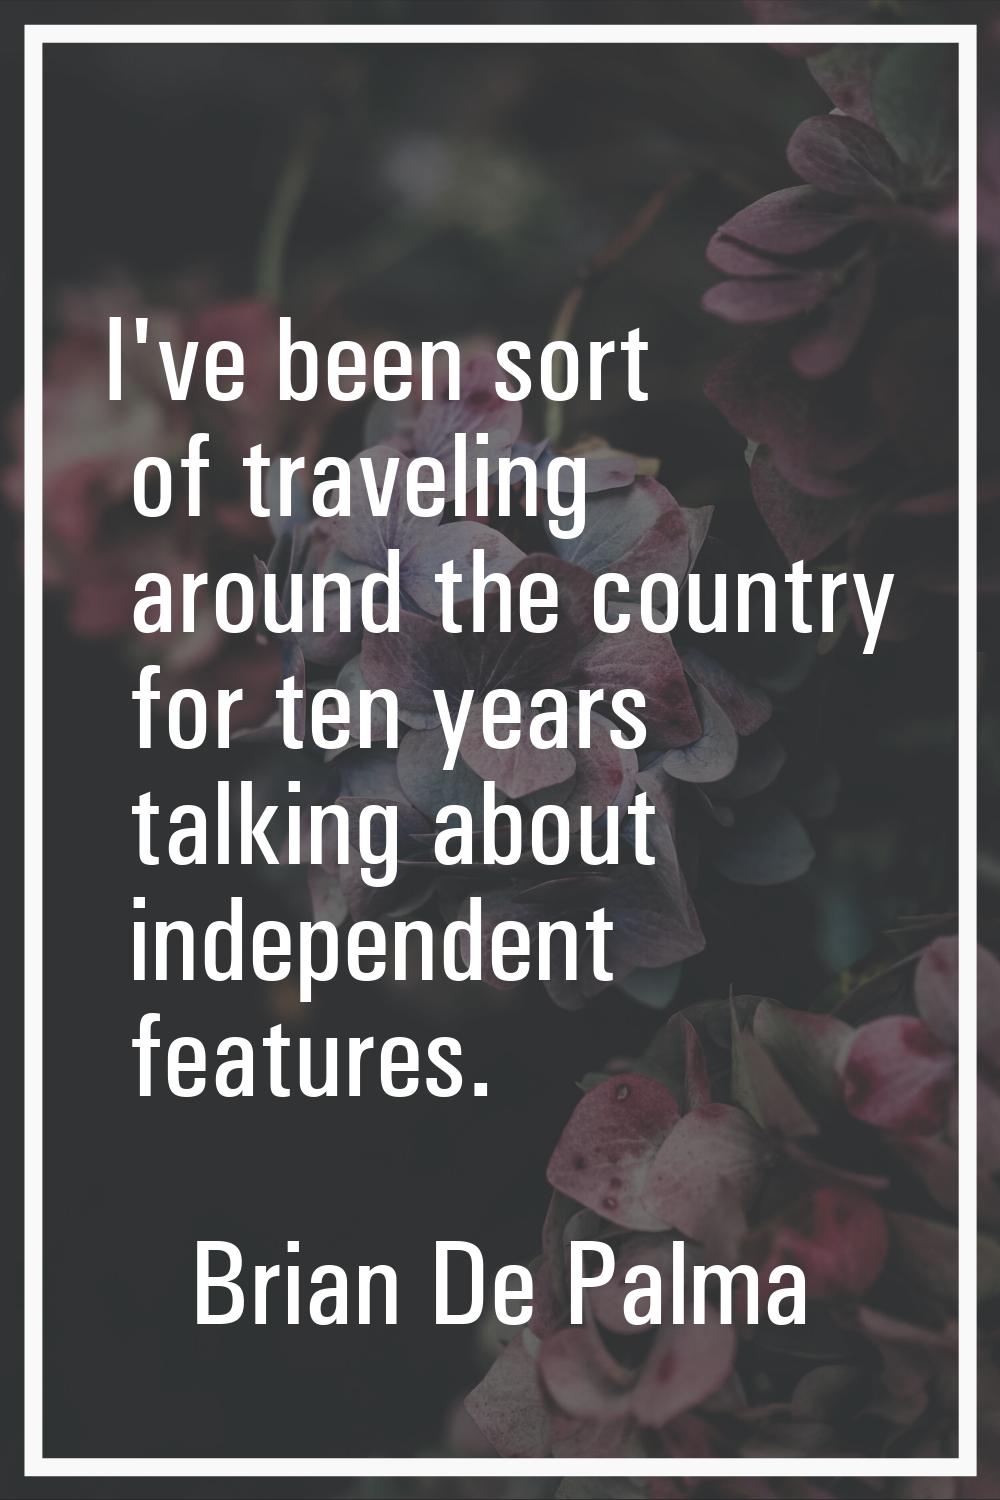 I've been sort of traveling around the country for ten years talking about independent features.